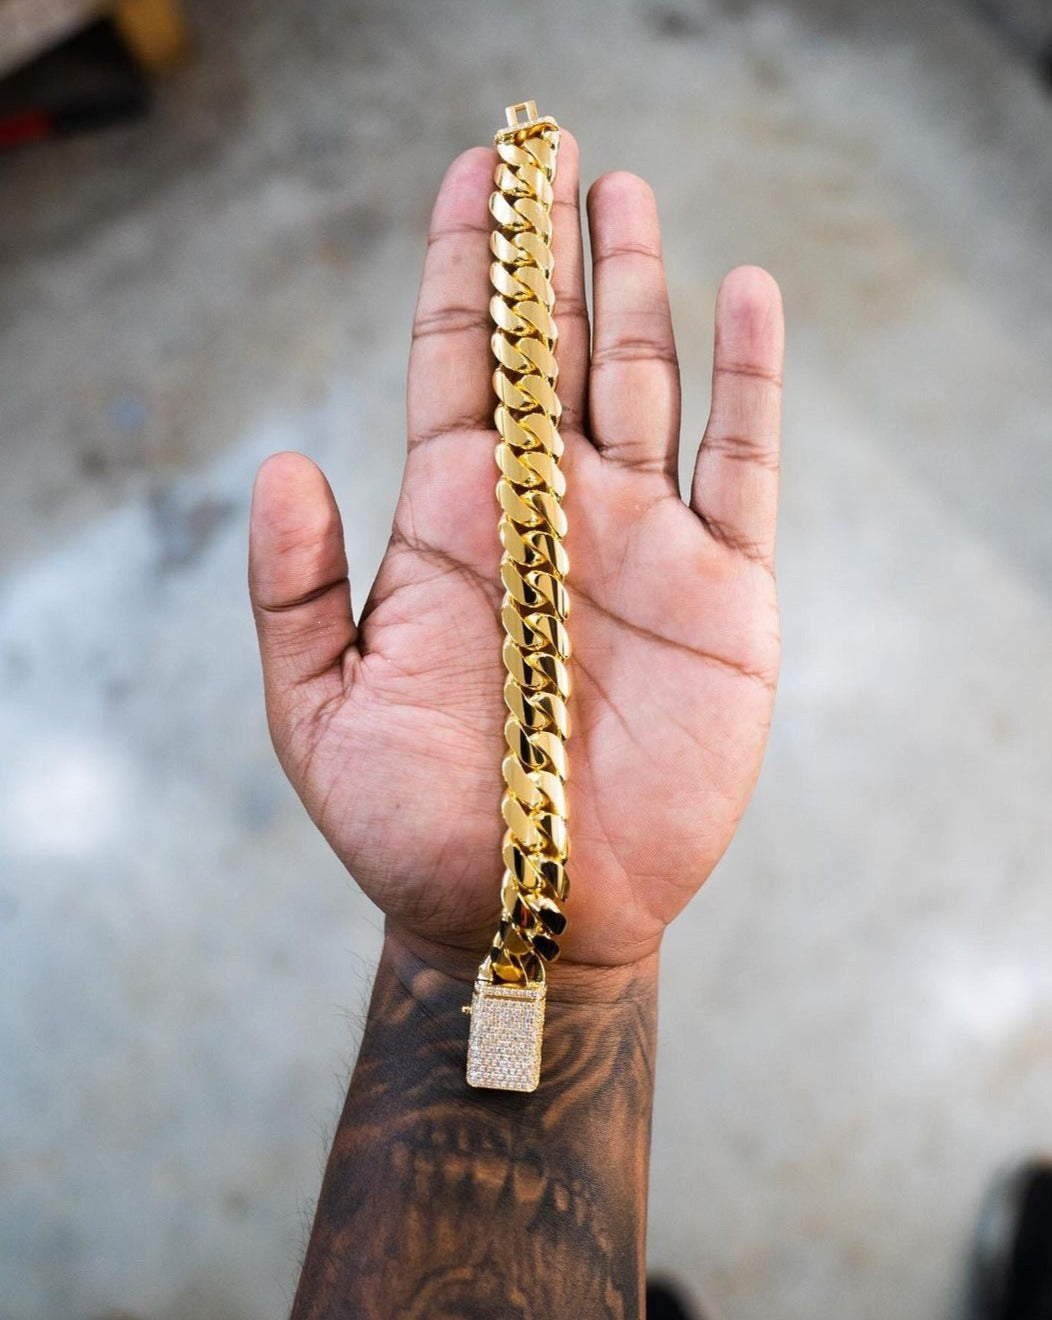 RARE PRINCE by CARAT SUTRA | Solid 14mm Miami Cuban Link Bracelet with Iced Lock | 22kt Gold Micron Plated on 925 Sterling Silver Bracelet with AAA+ Quality Swarovski Diamonds | Men's Jewelry | With Certificate of Authenticity and 925 Hallmark - caratsutra